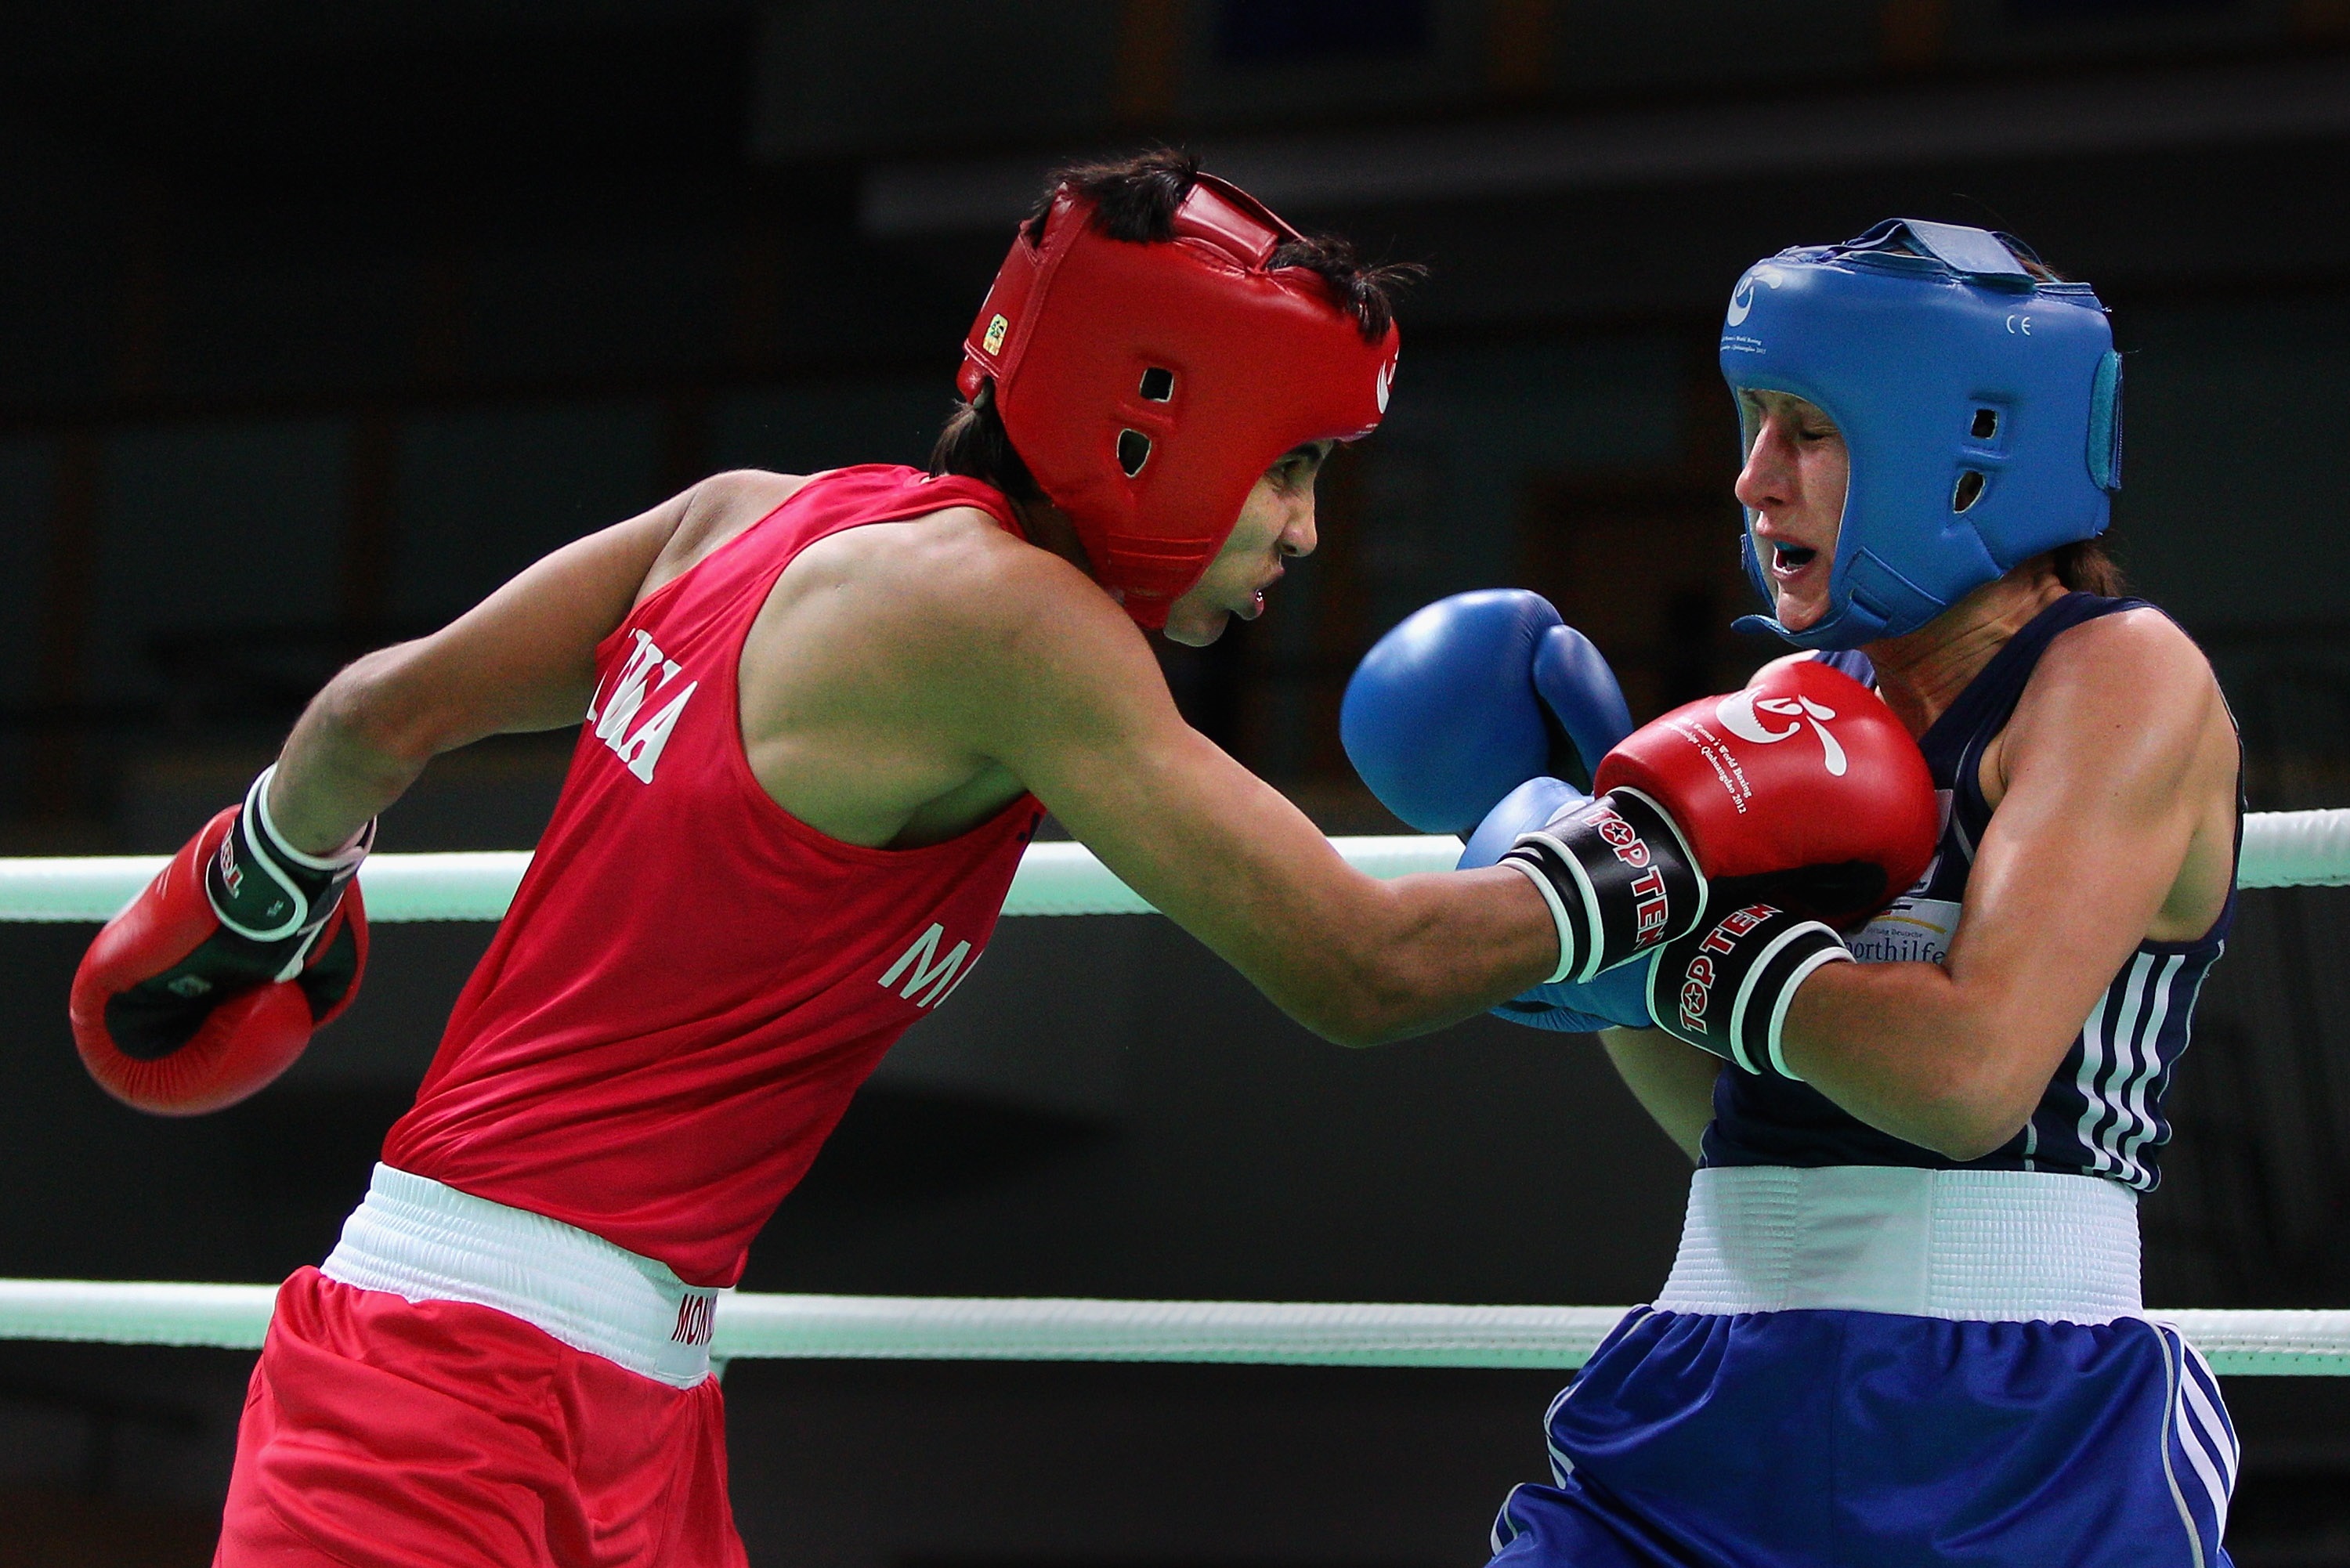 Sonia Lather settles for Silver at Women's World Boxing Championship